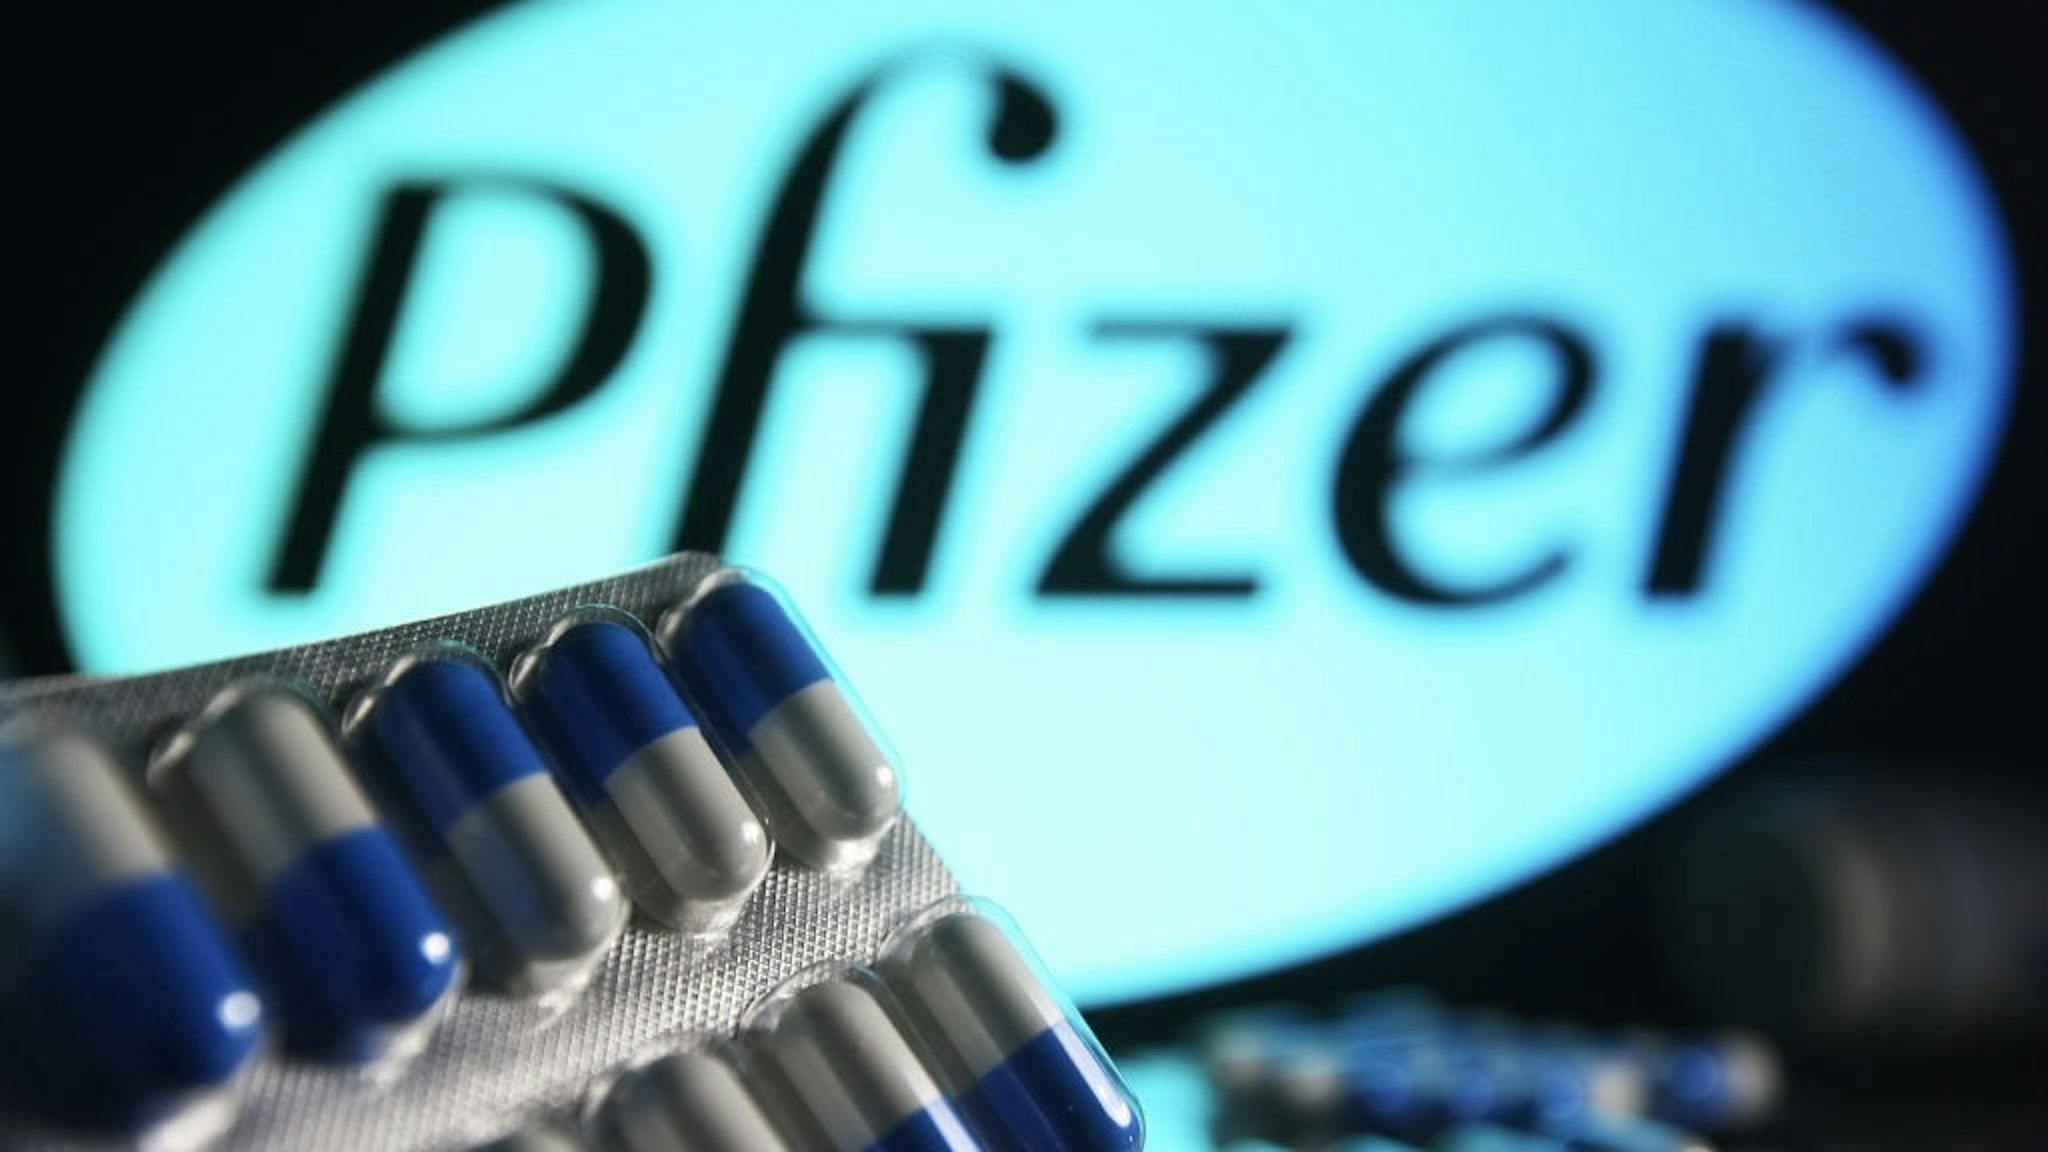 In this photo illustration, medicine pills are seen on... UKRAINE - 2021/10/16: In this photo illustration, medicine pills are seen on display with a Pfizer logo in the background. (Photo Illustration by Pavlo Gonchar/SOPA Images/LightRocket via Getty Images) SOPA Images / Contributor